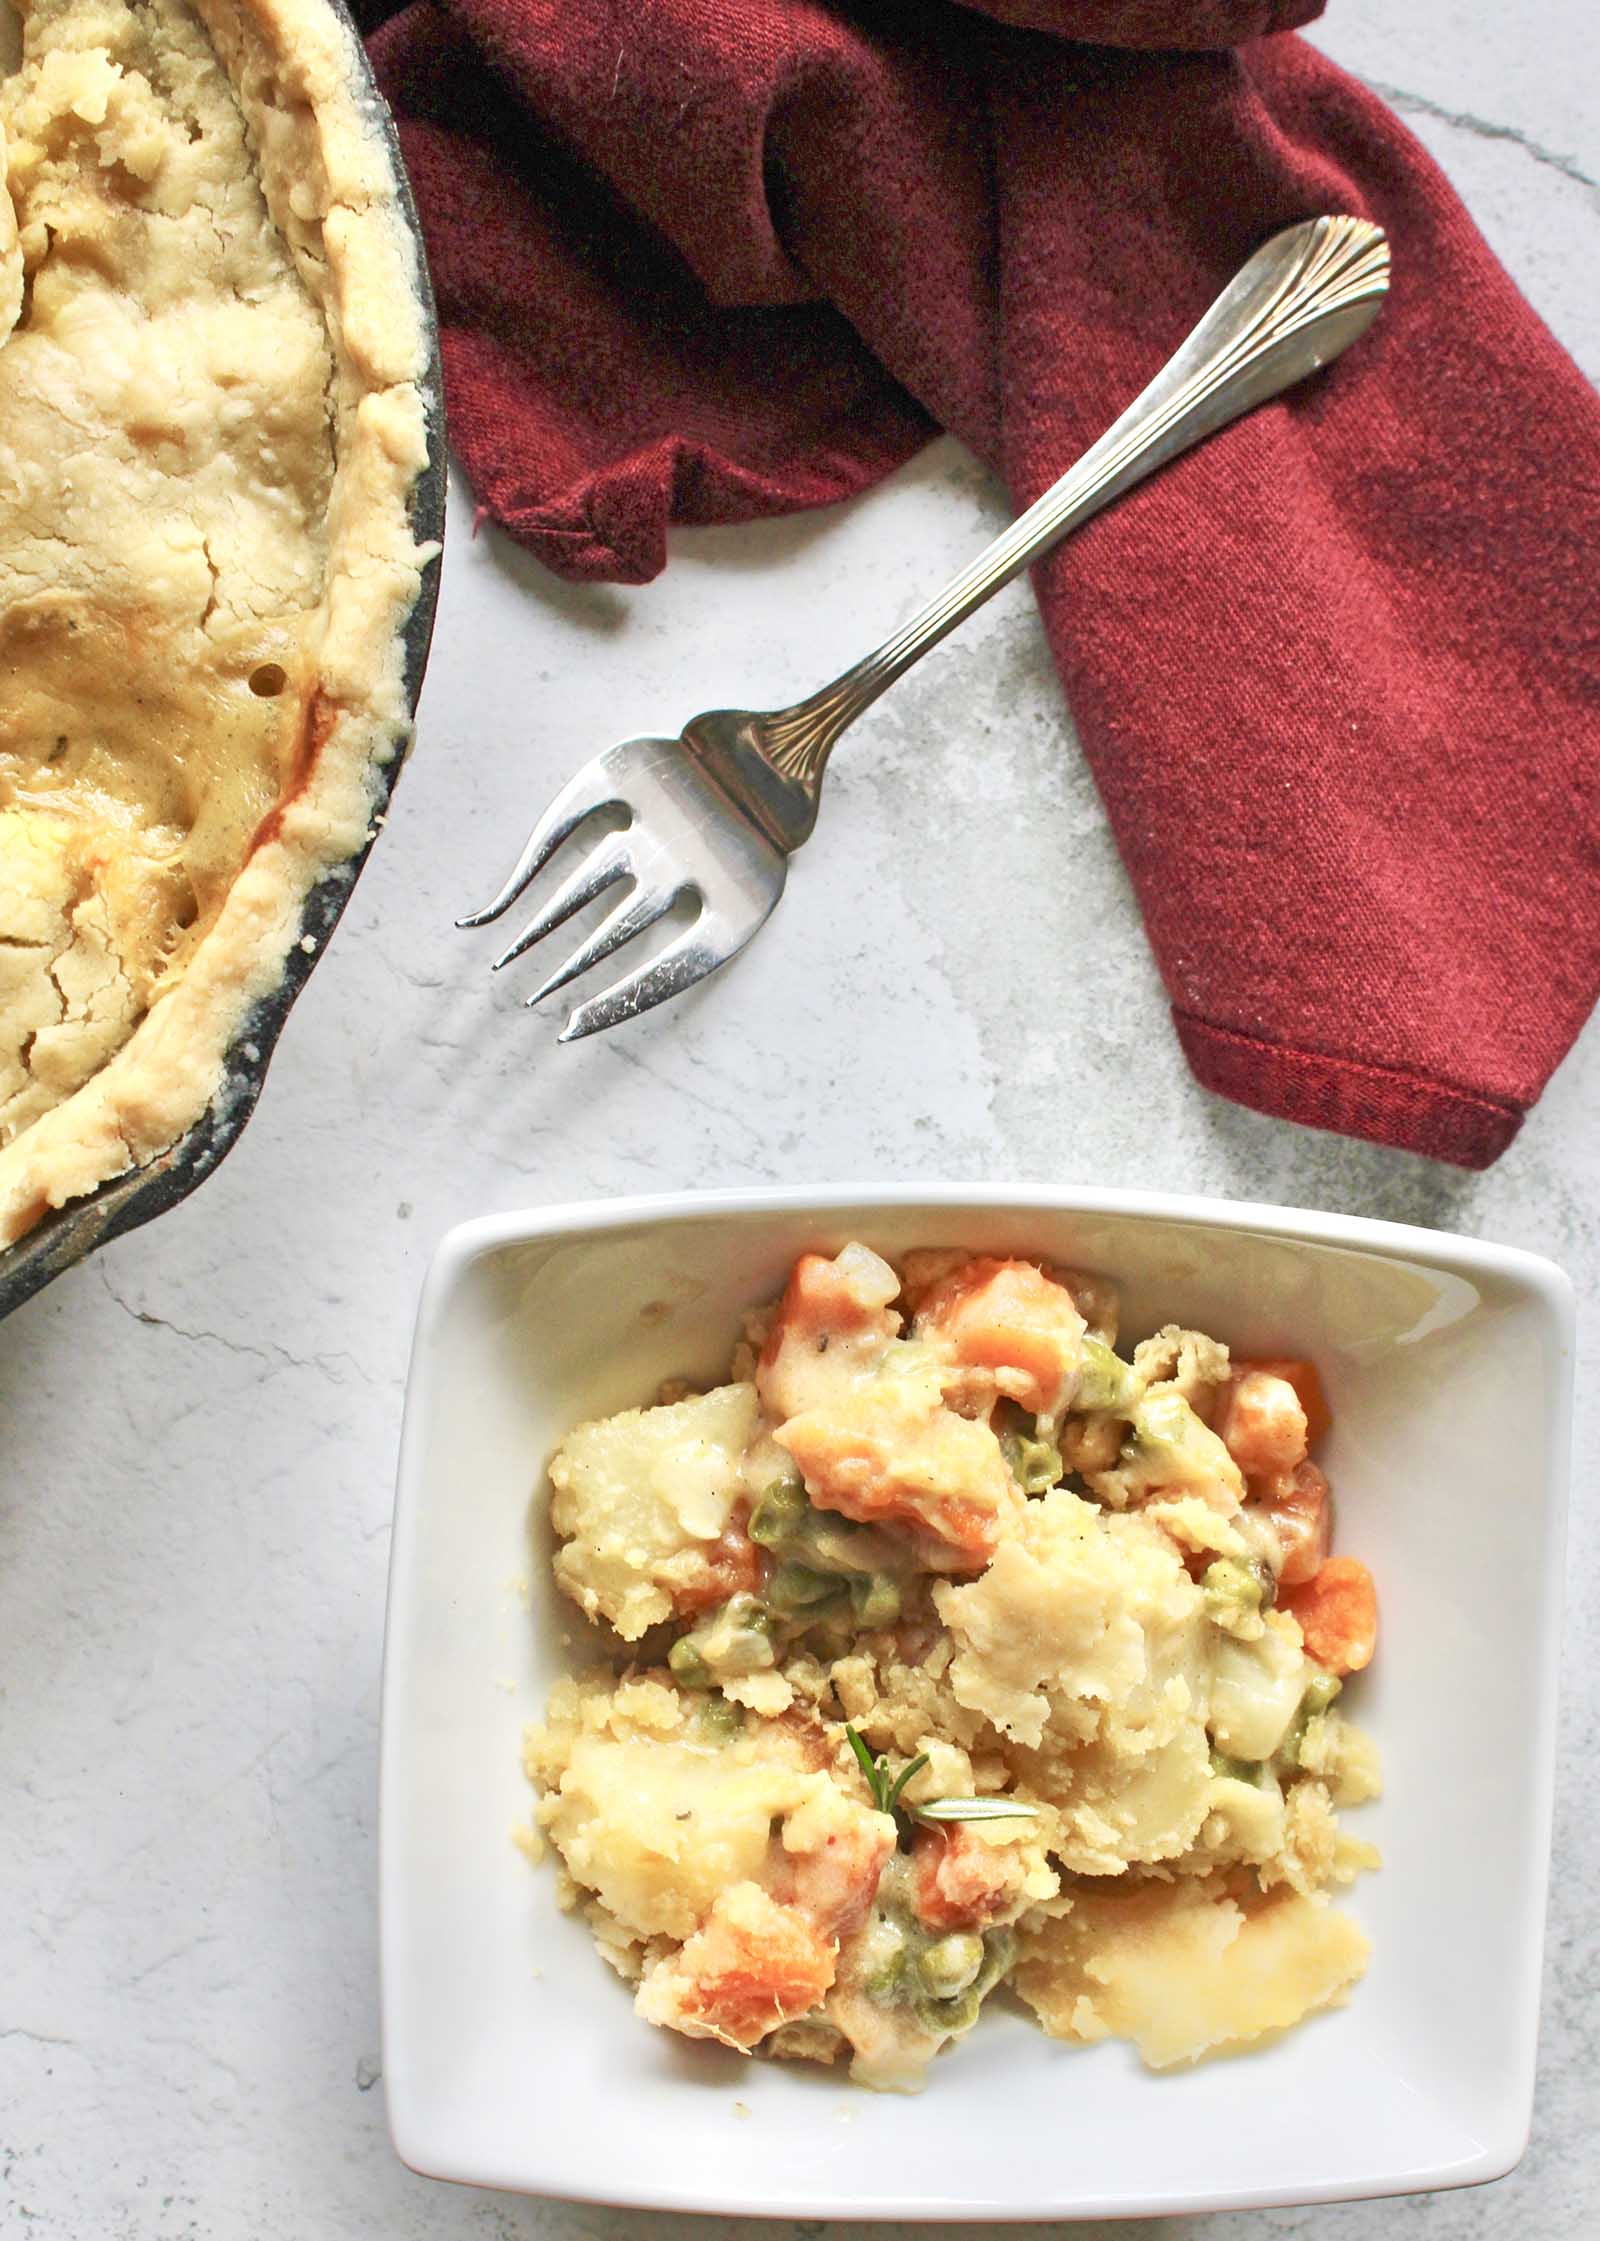 A bowl of Vegetable Casserole in a bowl with a fork and the cast iron skillet pie behind it.